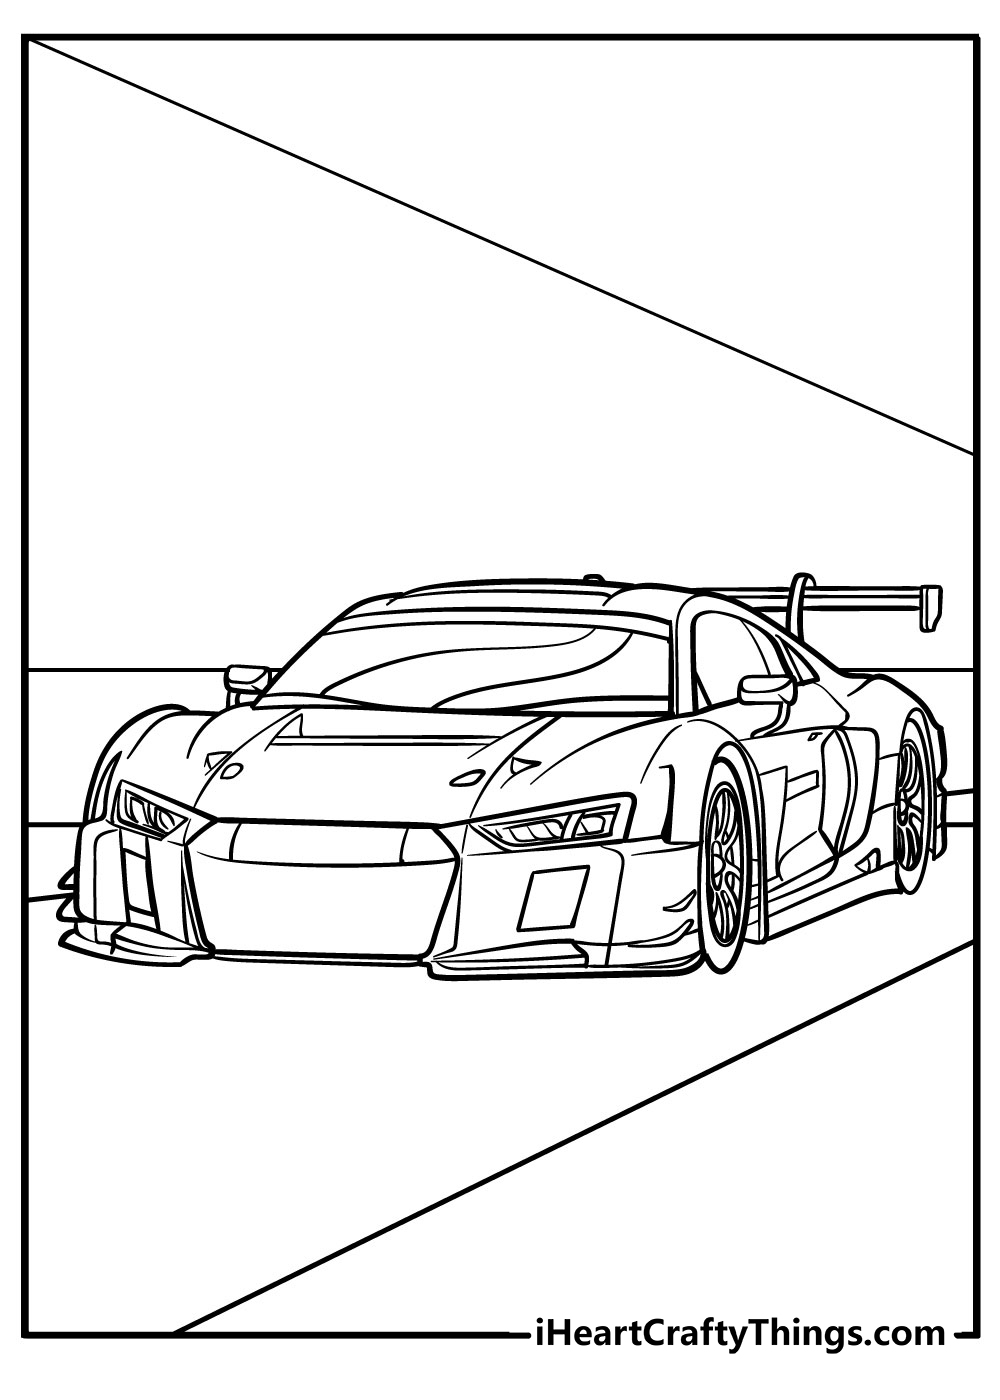 Super Cars Coloring book for kids free download